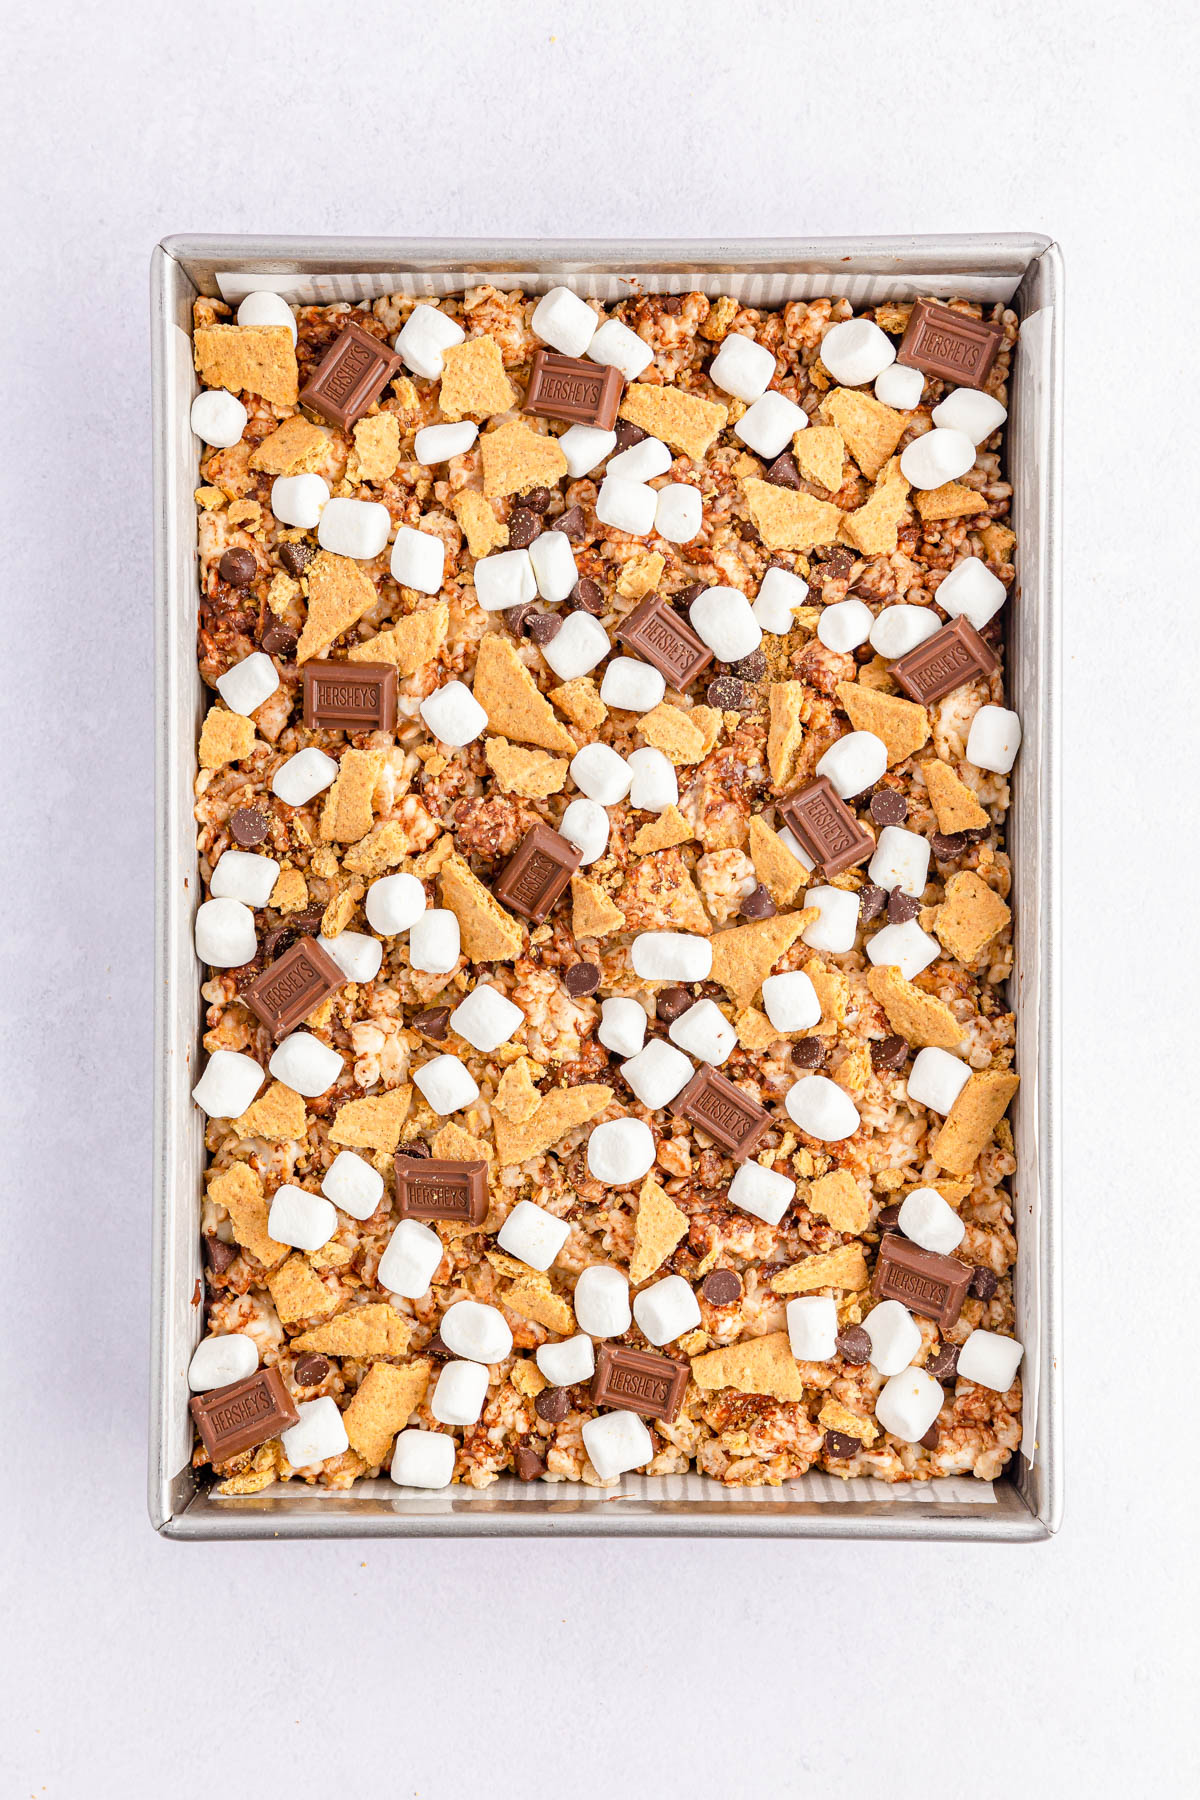 Smore's Rice Krispie Treats topped with chocolate, mini marshmallows and graham crackers